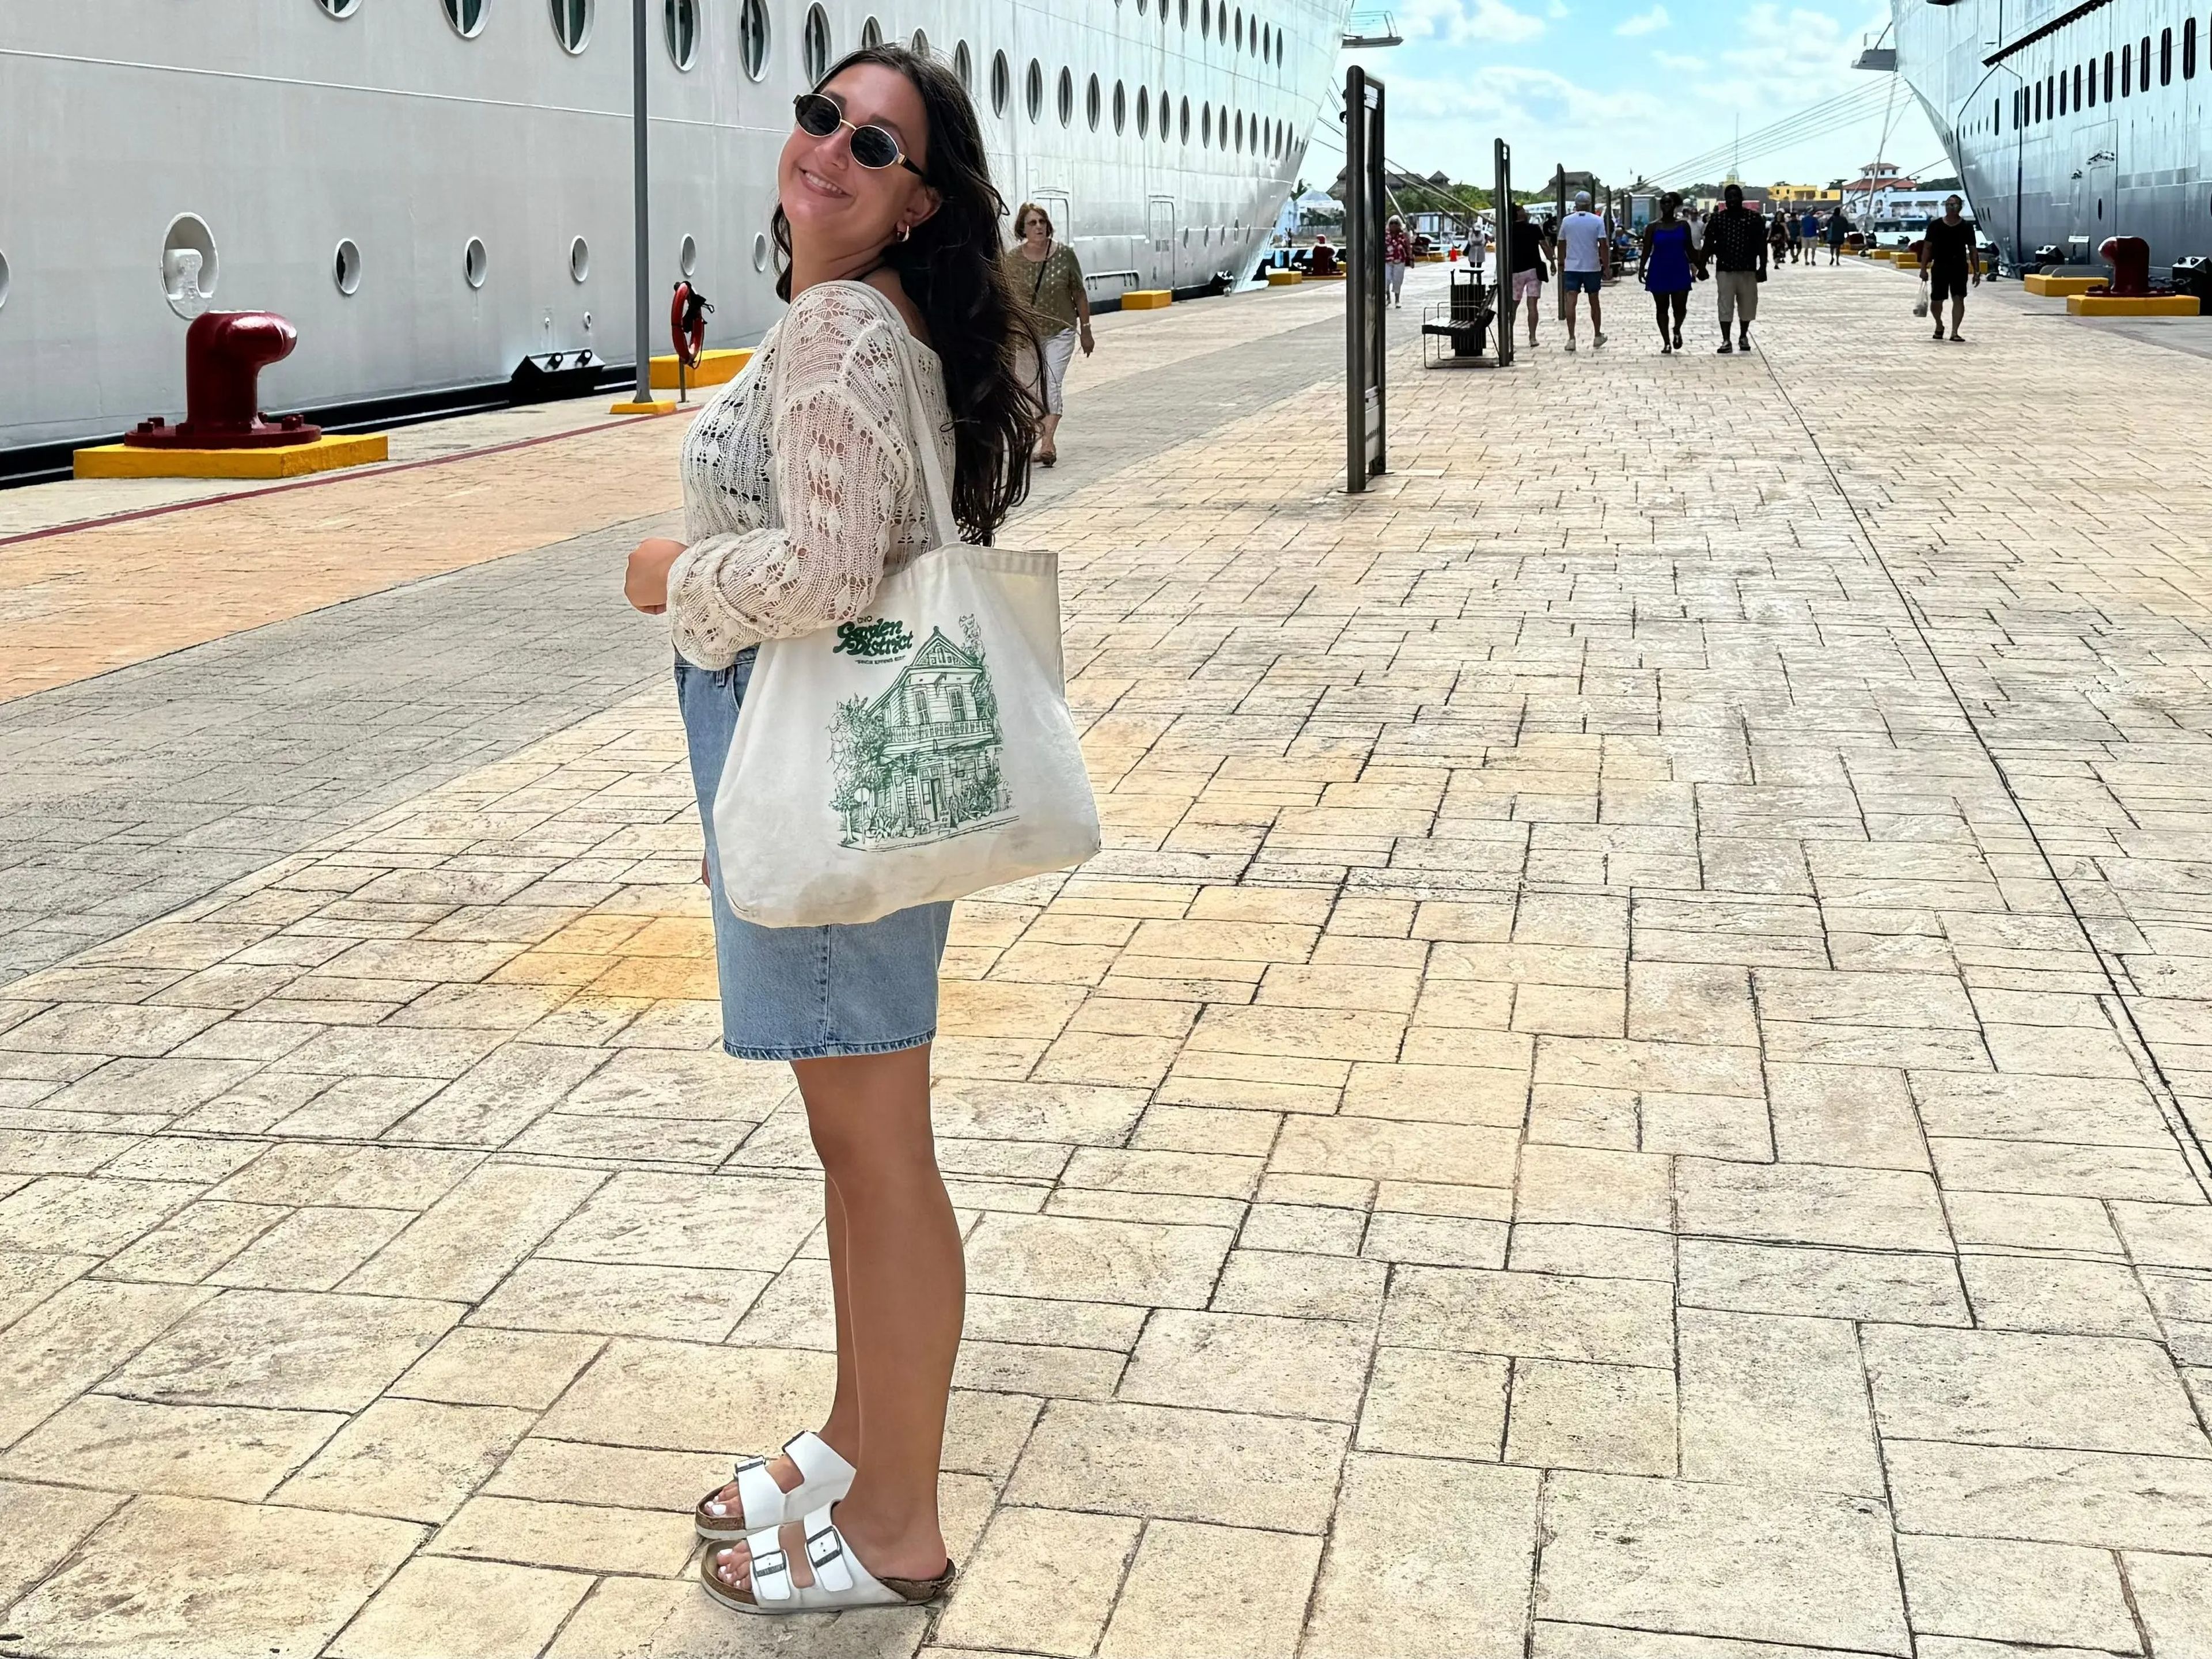 jordana posing in front of a cruise ship carrying a tote bag